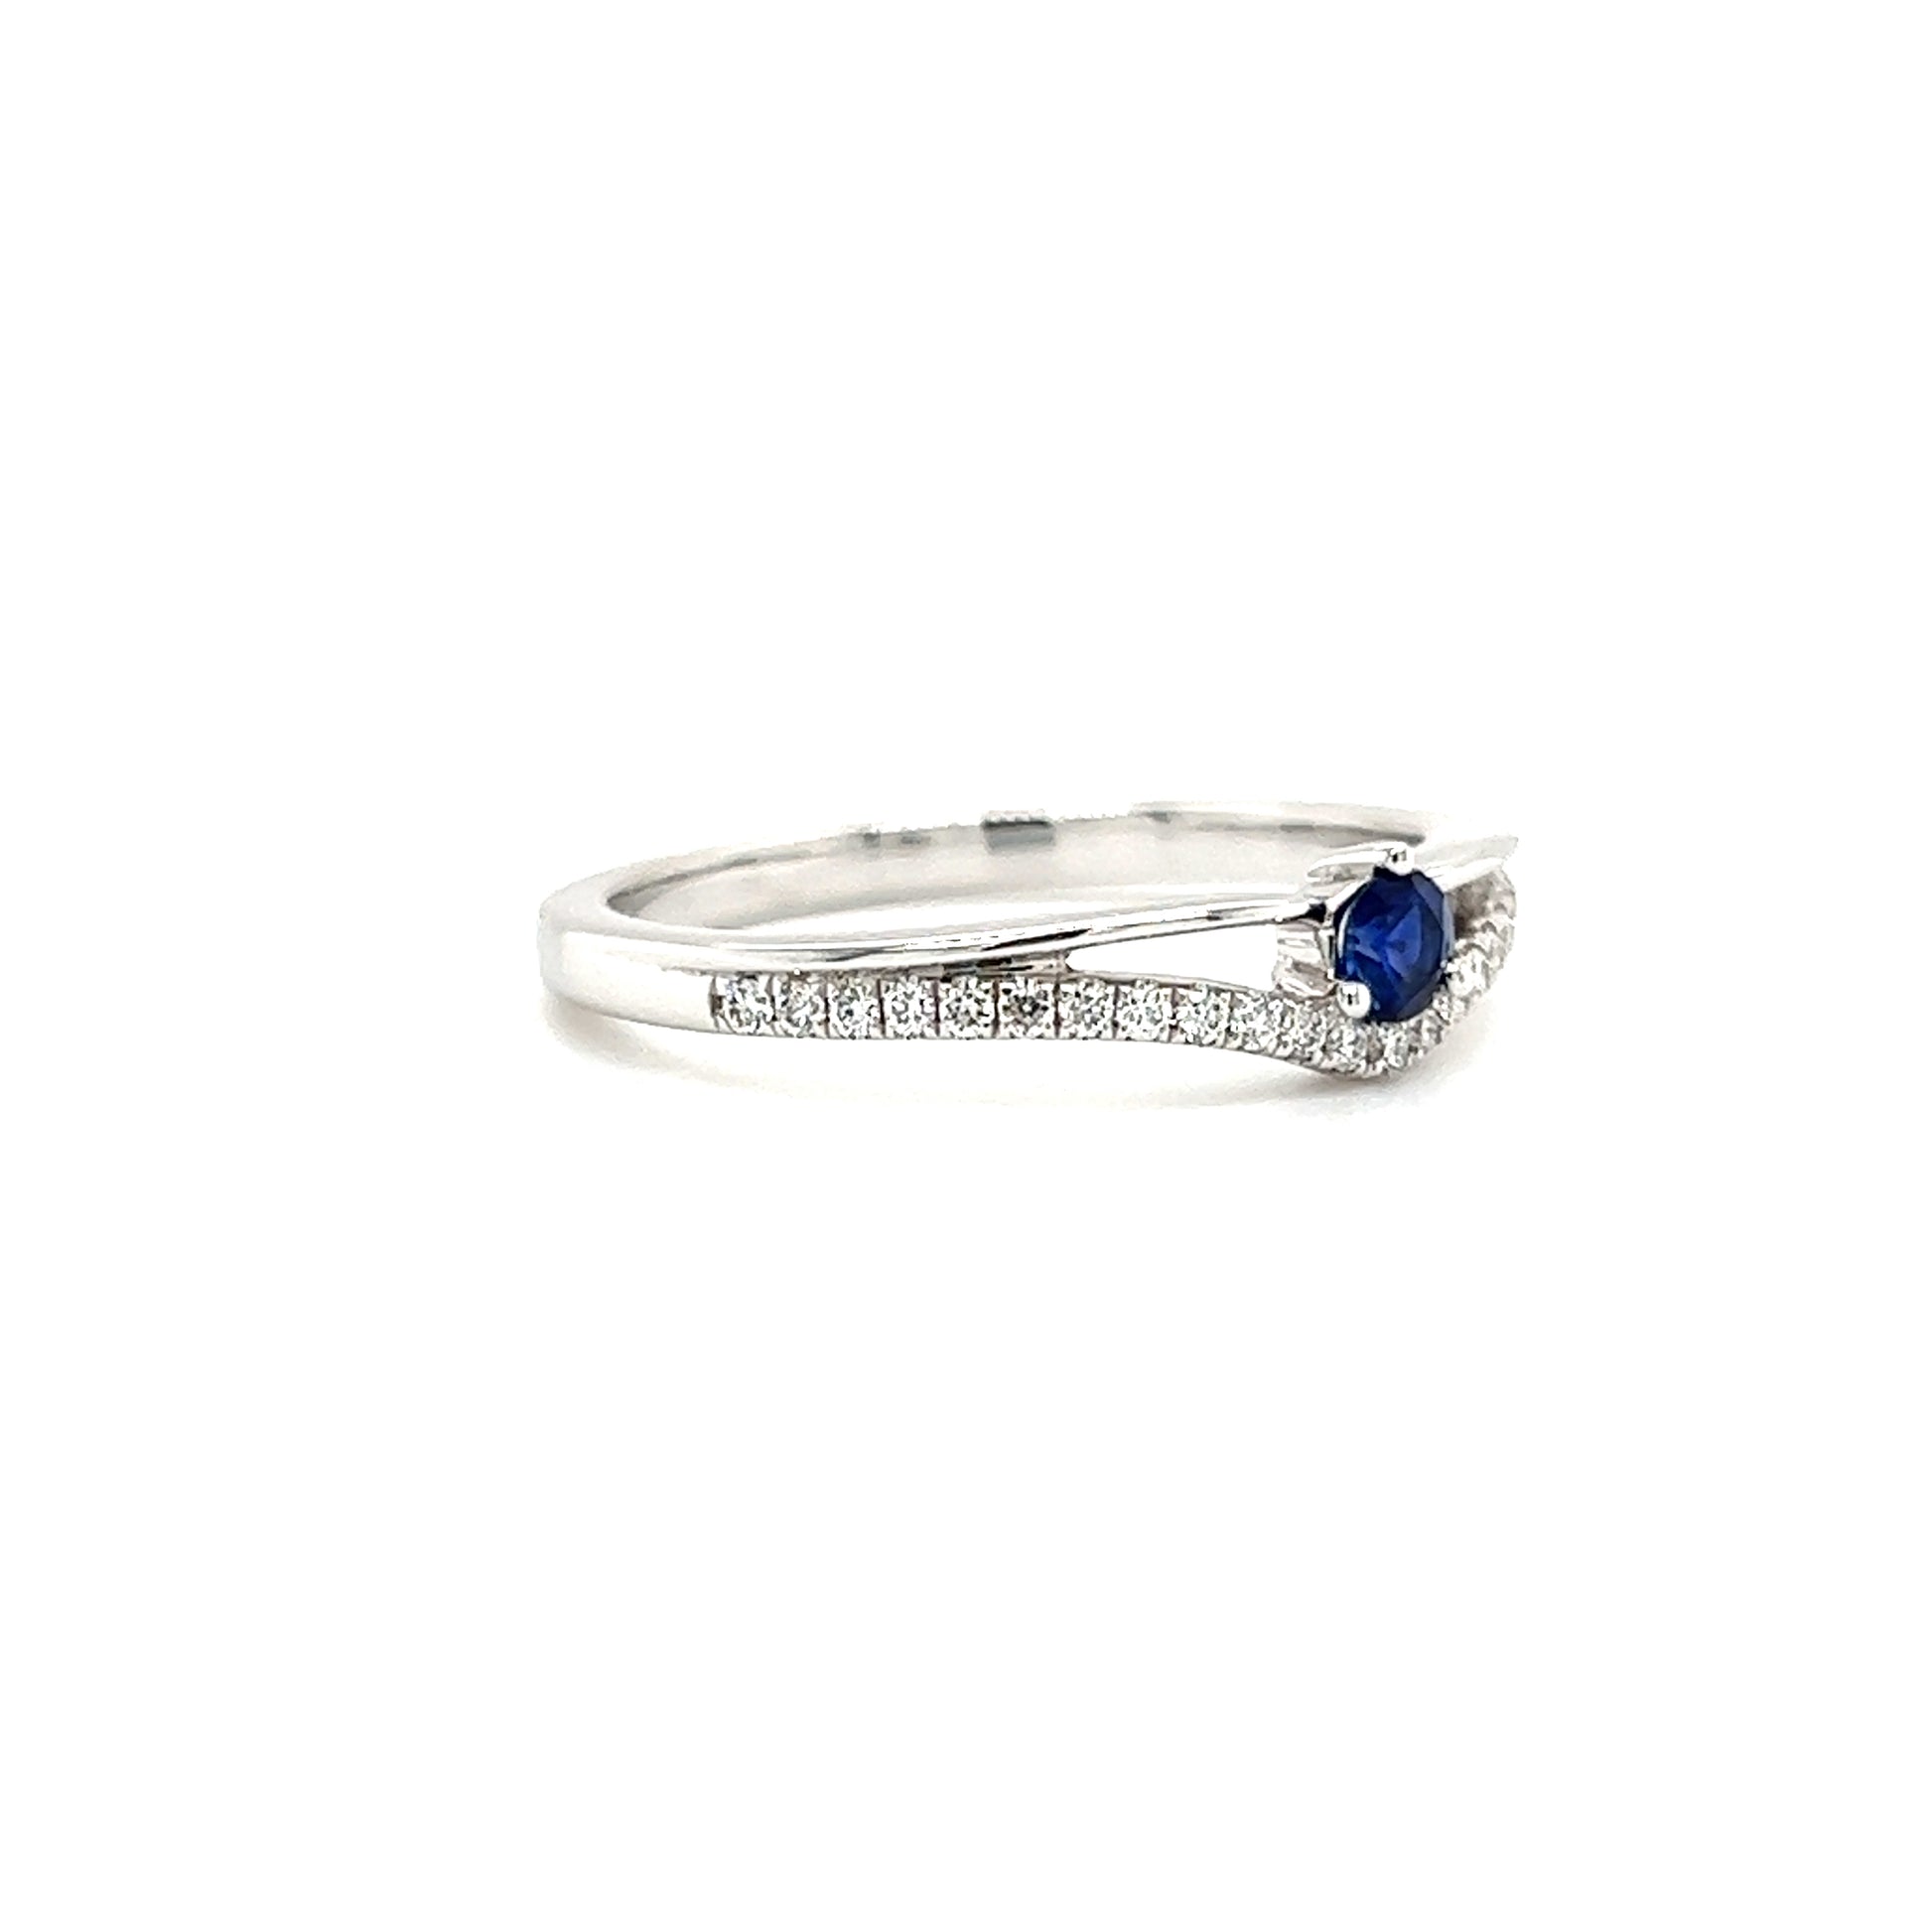 Round Sapphire ring with Twenty-Five Side Diamonds in 14K White Gold Right Side View